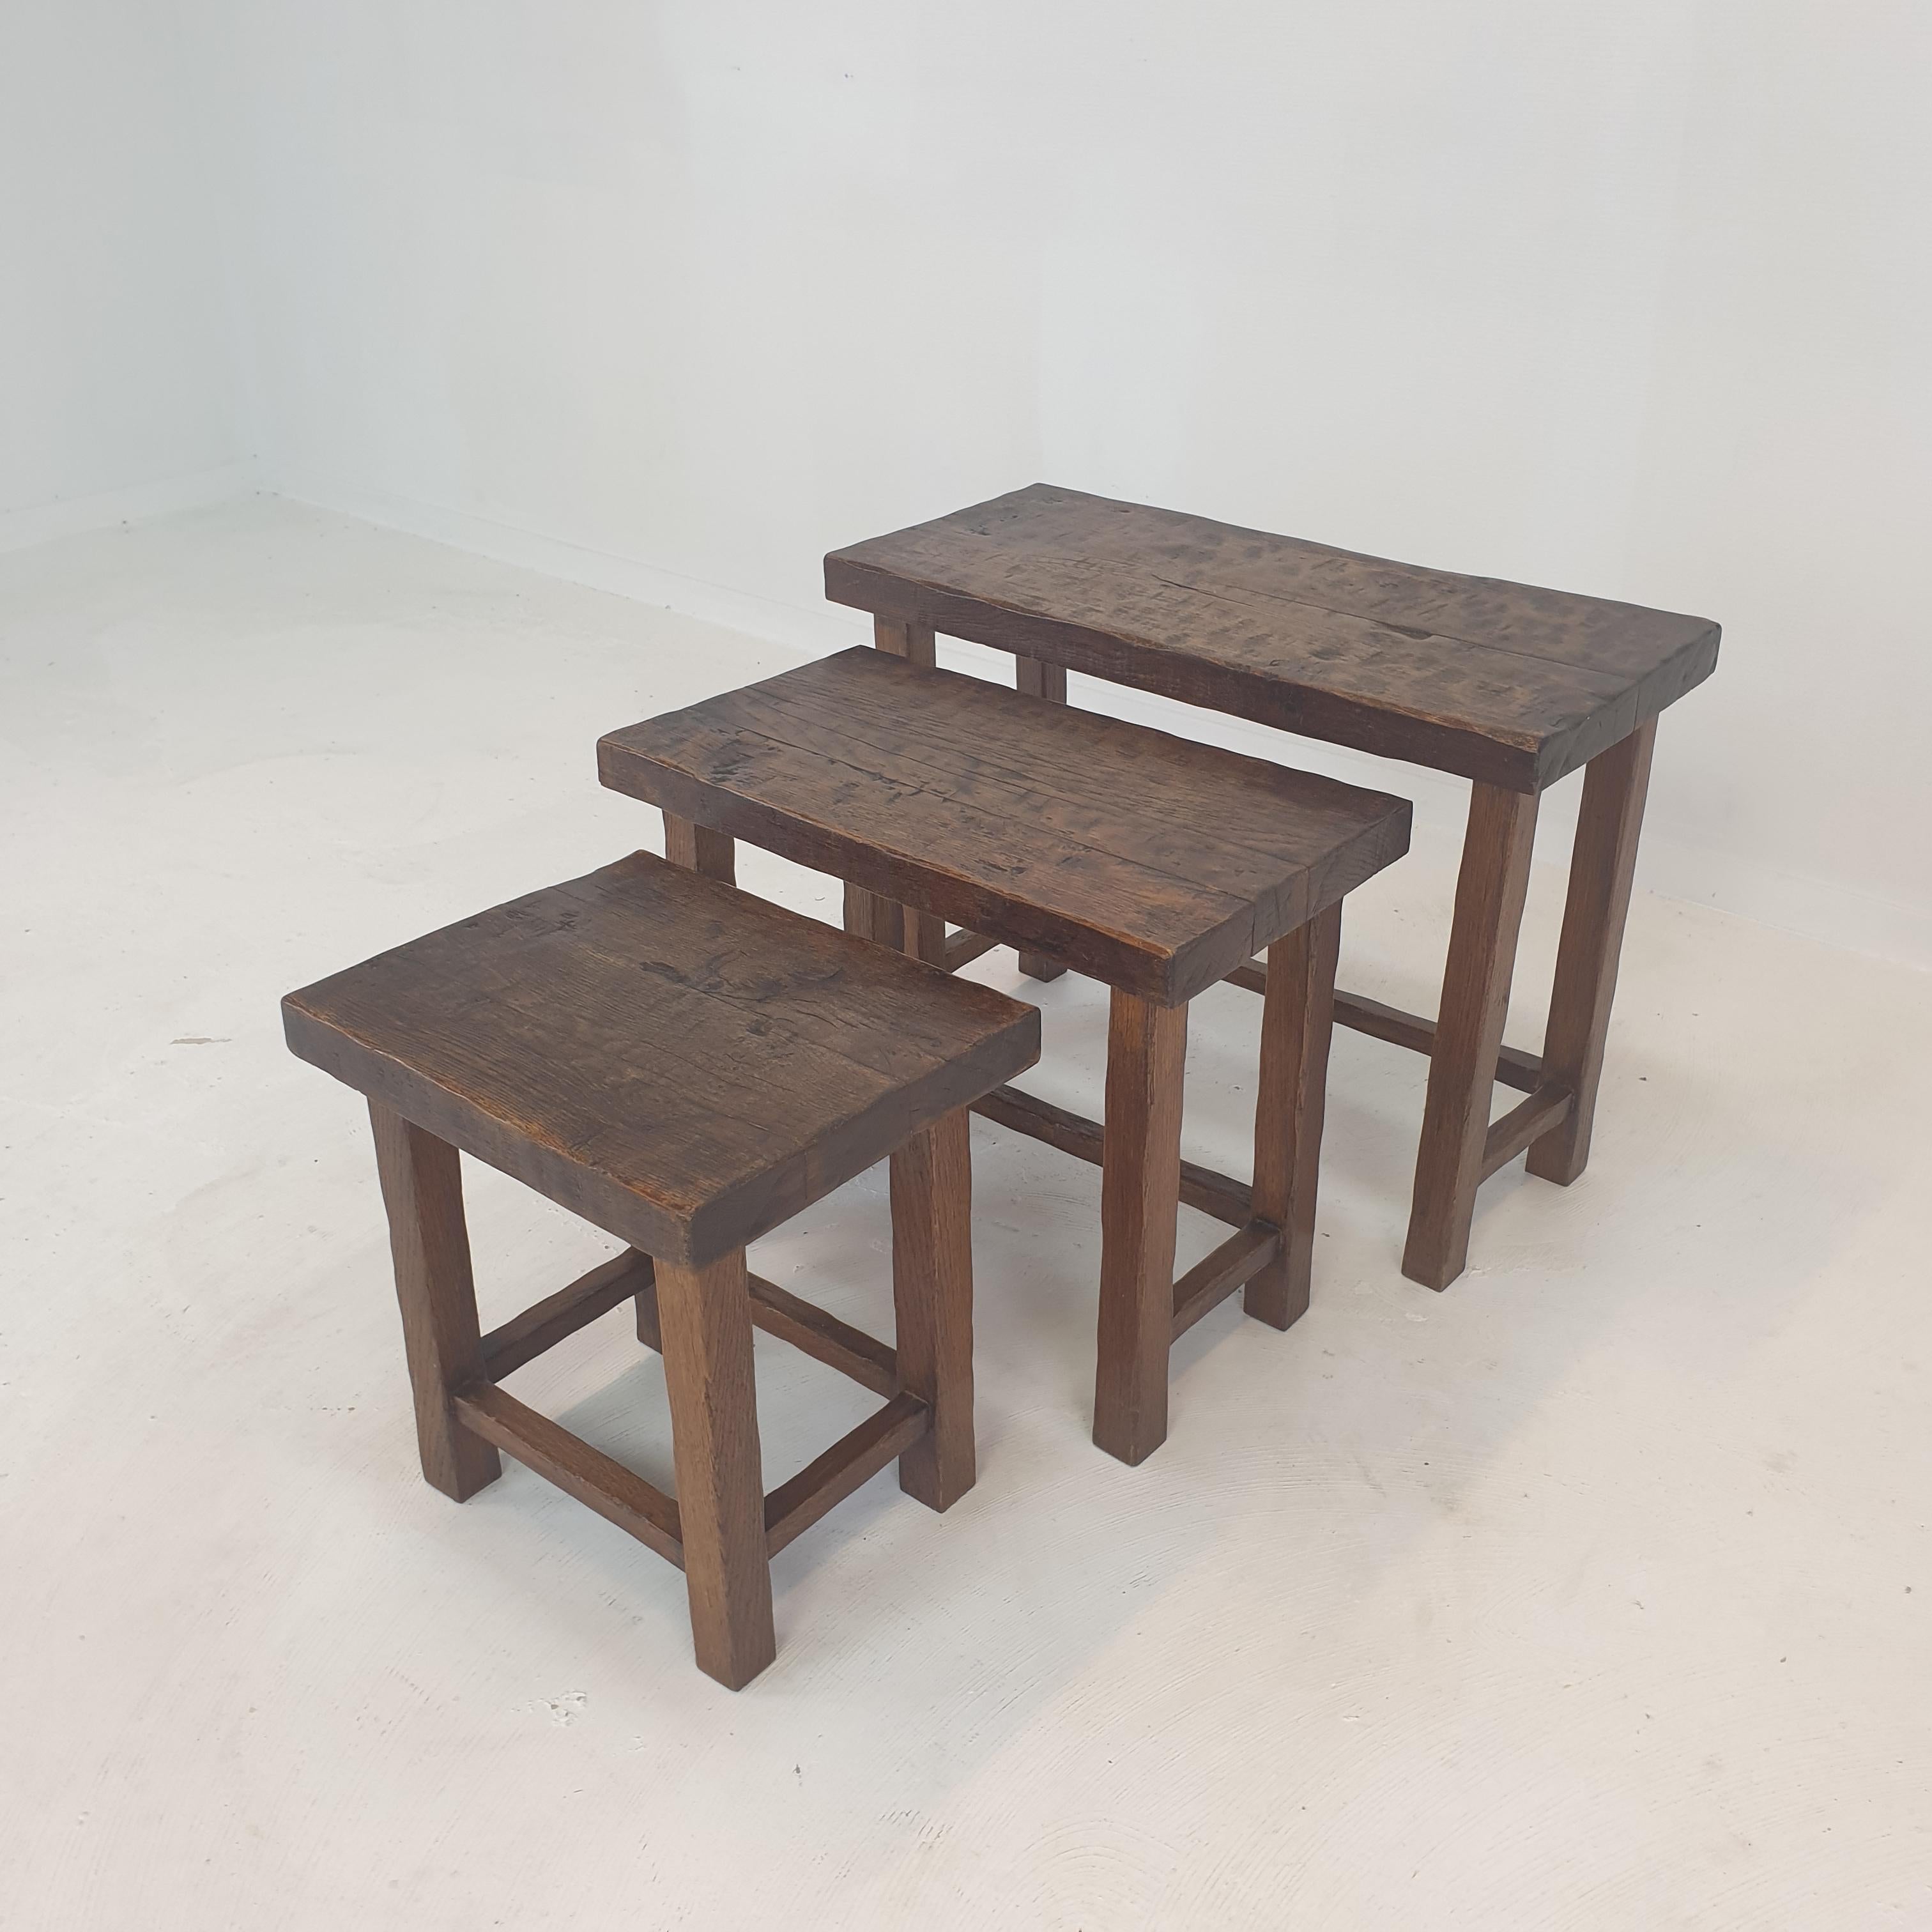 Very nice set of 3 Coffee or Nesting Tables, 1960's.
The tables have all a different size so they fit in each other.

This brutalist set is handcrafted out of oak wood.